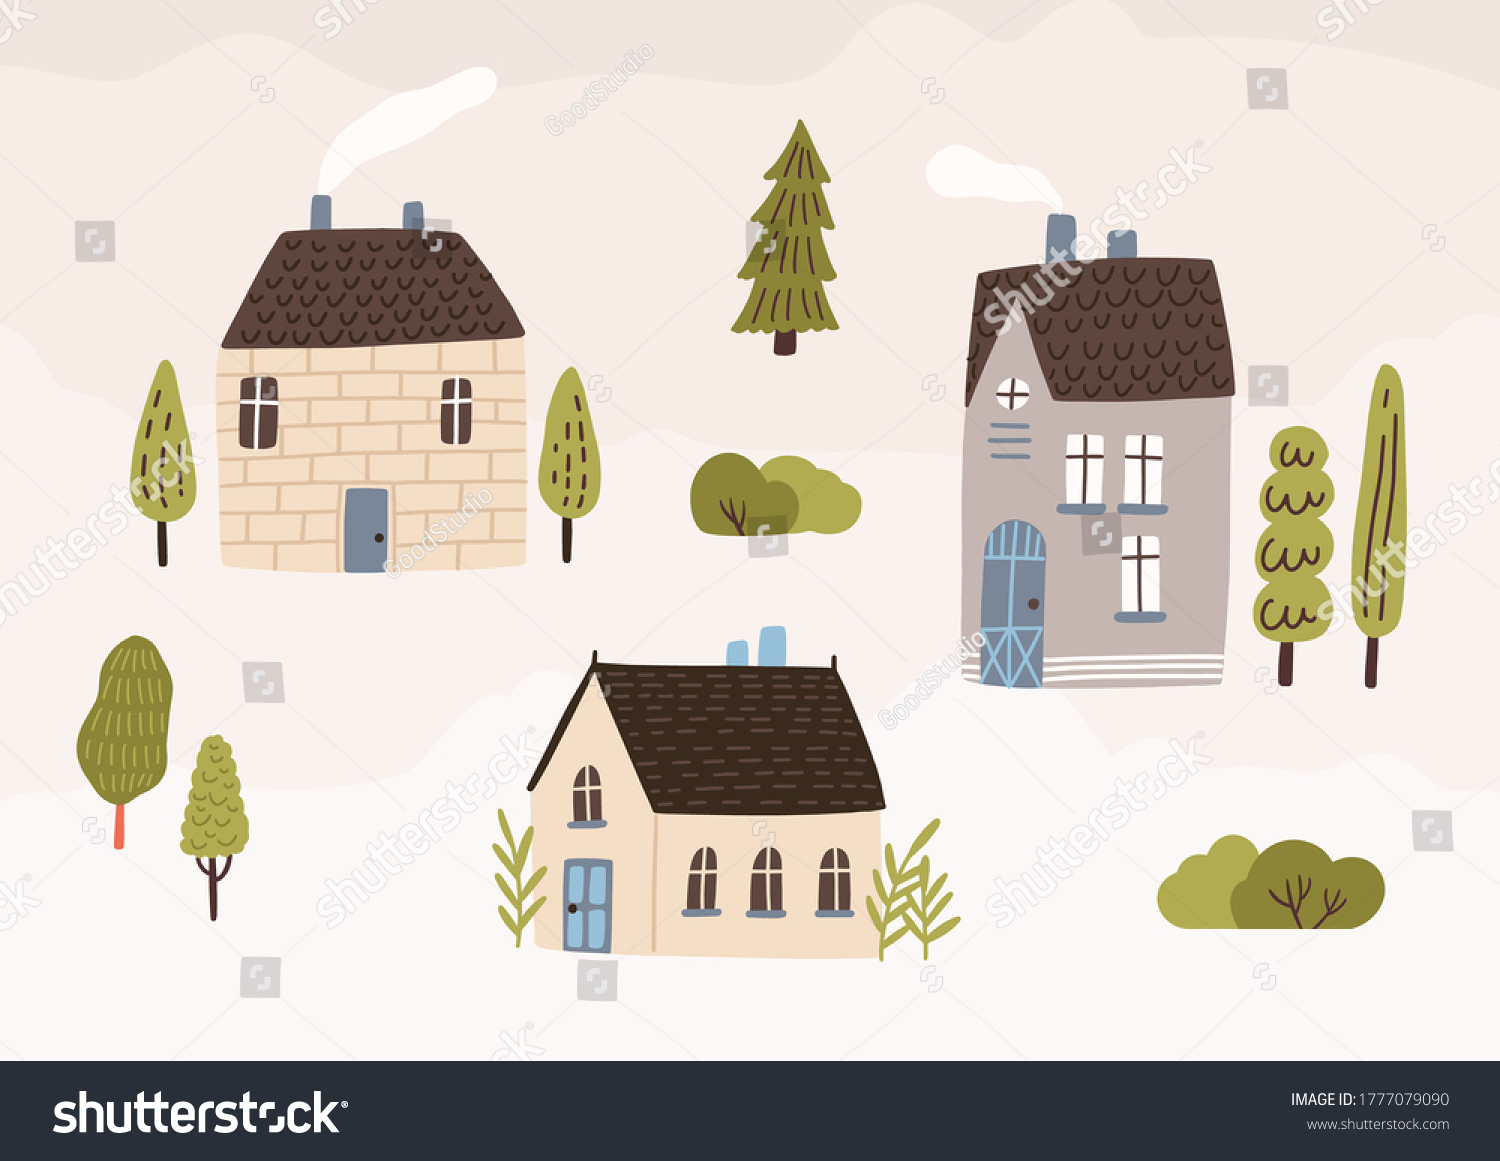 SVG of Hand drawn village with houses and trees vector flat illustration. Colorful cozy buildings with smoke from the chimney. Residential homestead, cottage or villa surrounded by green plants svg